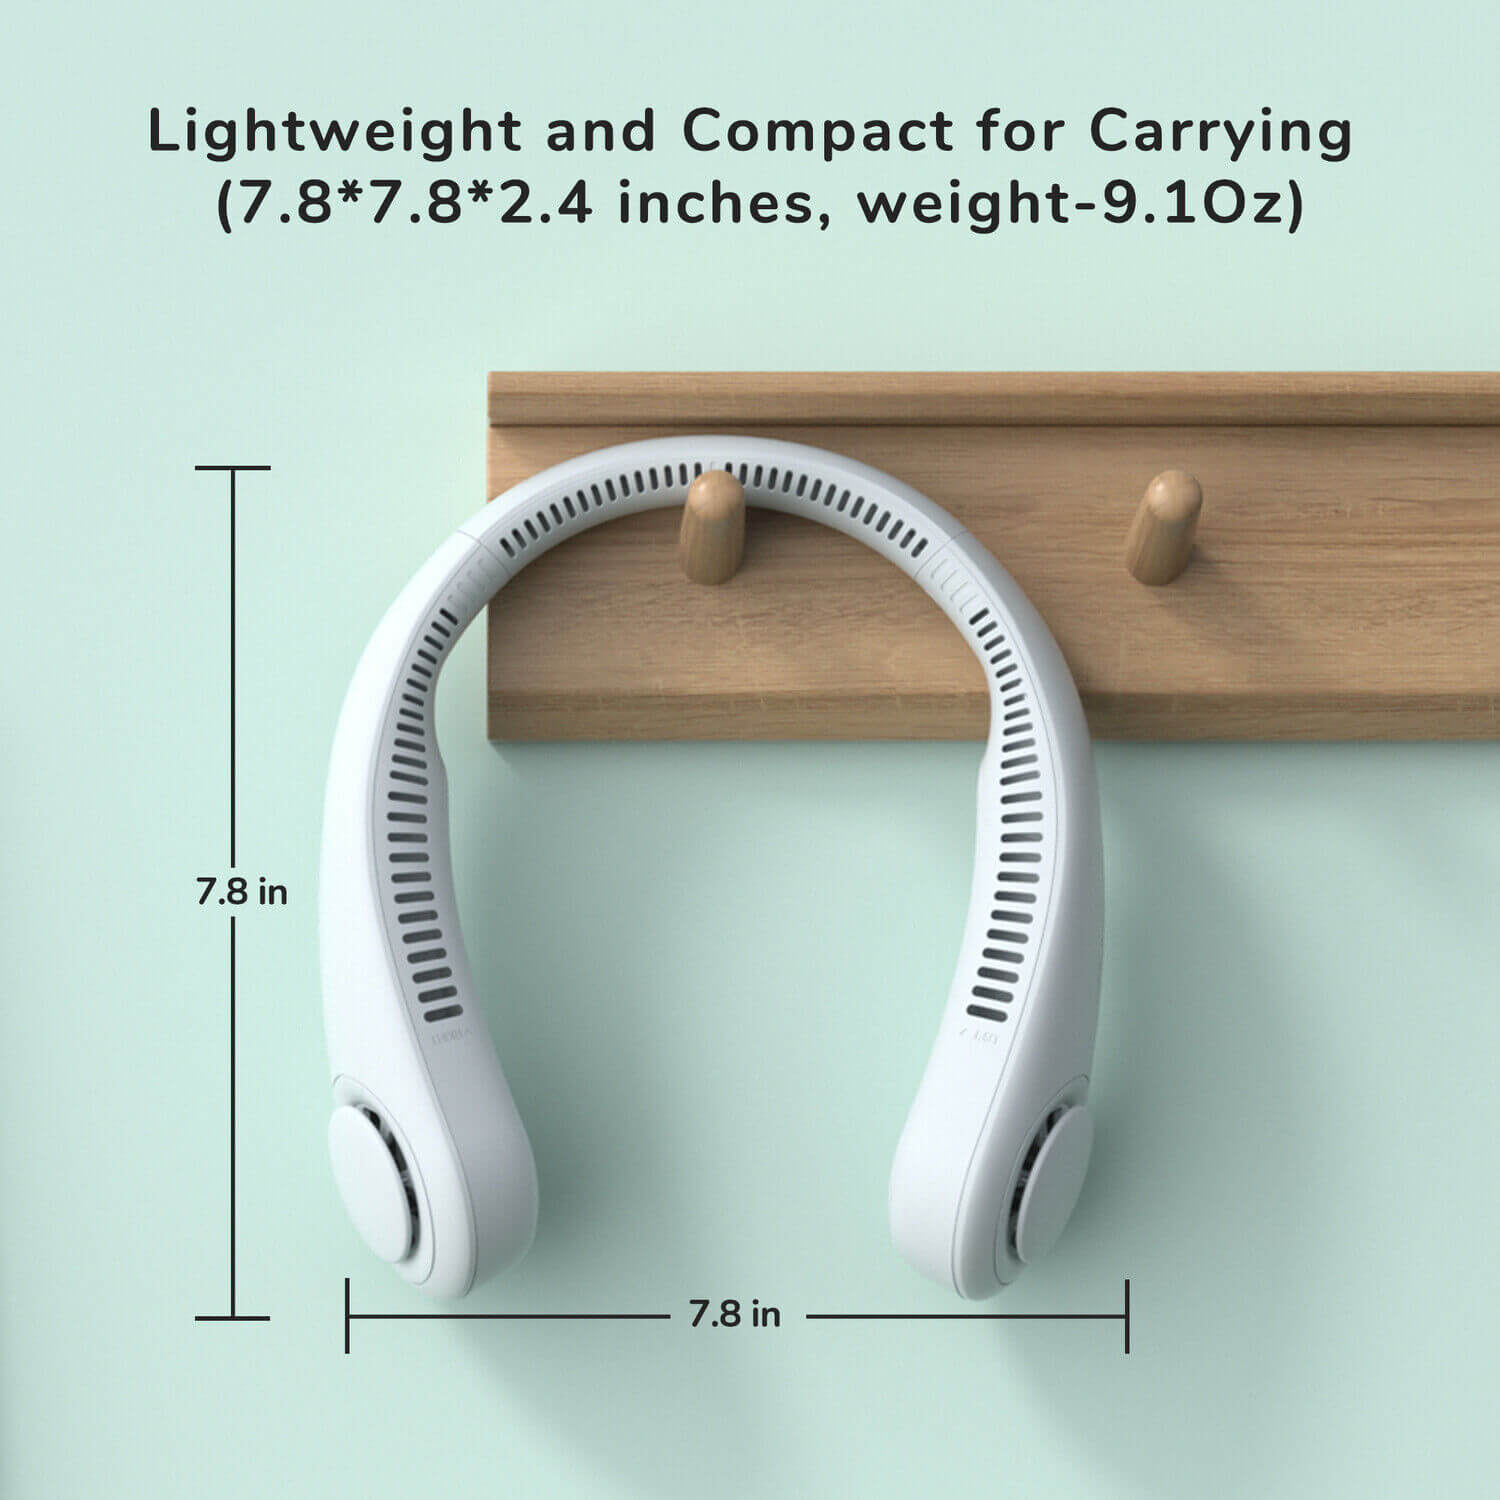 Our Neck Fan is lightweight and compact for carrying